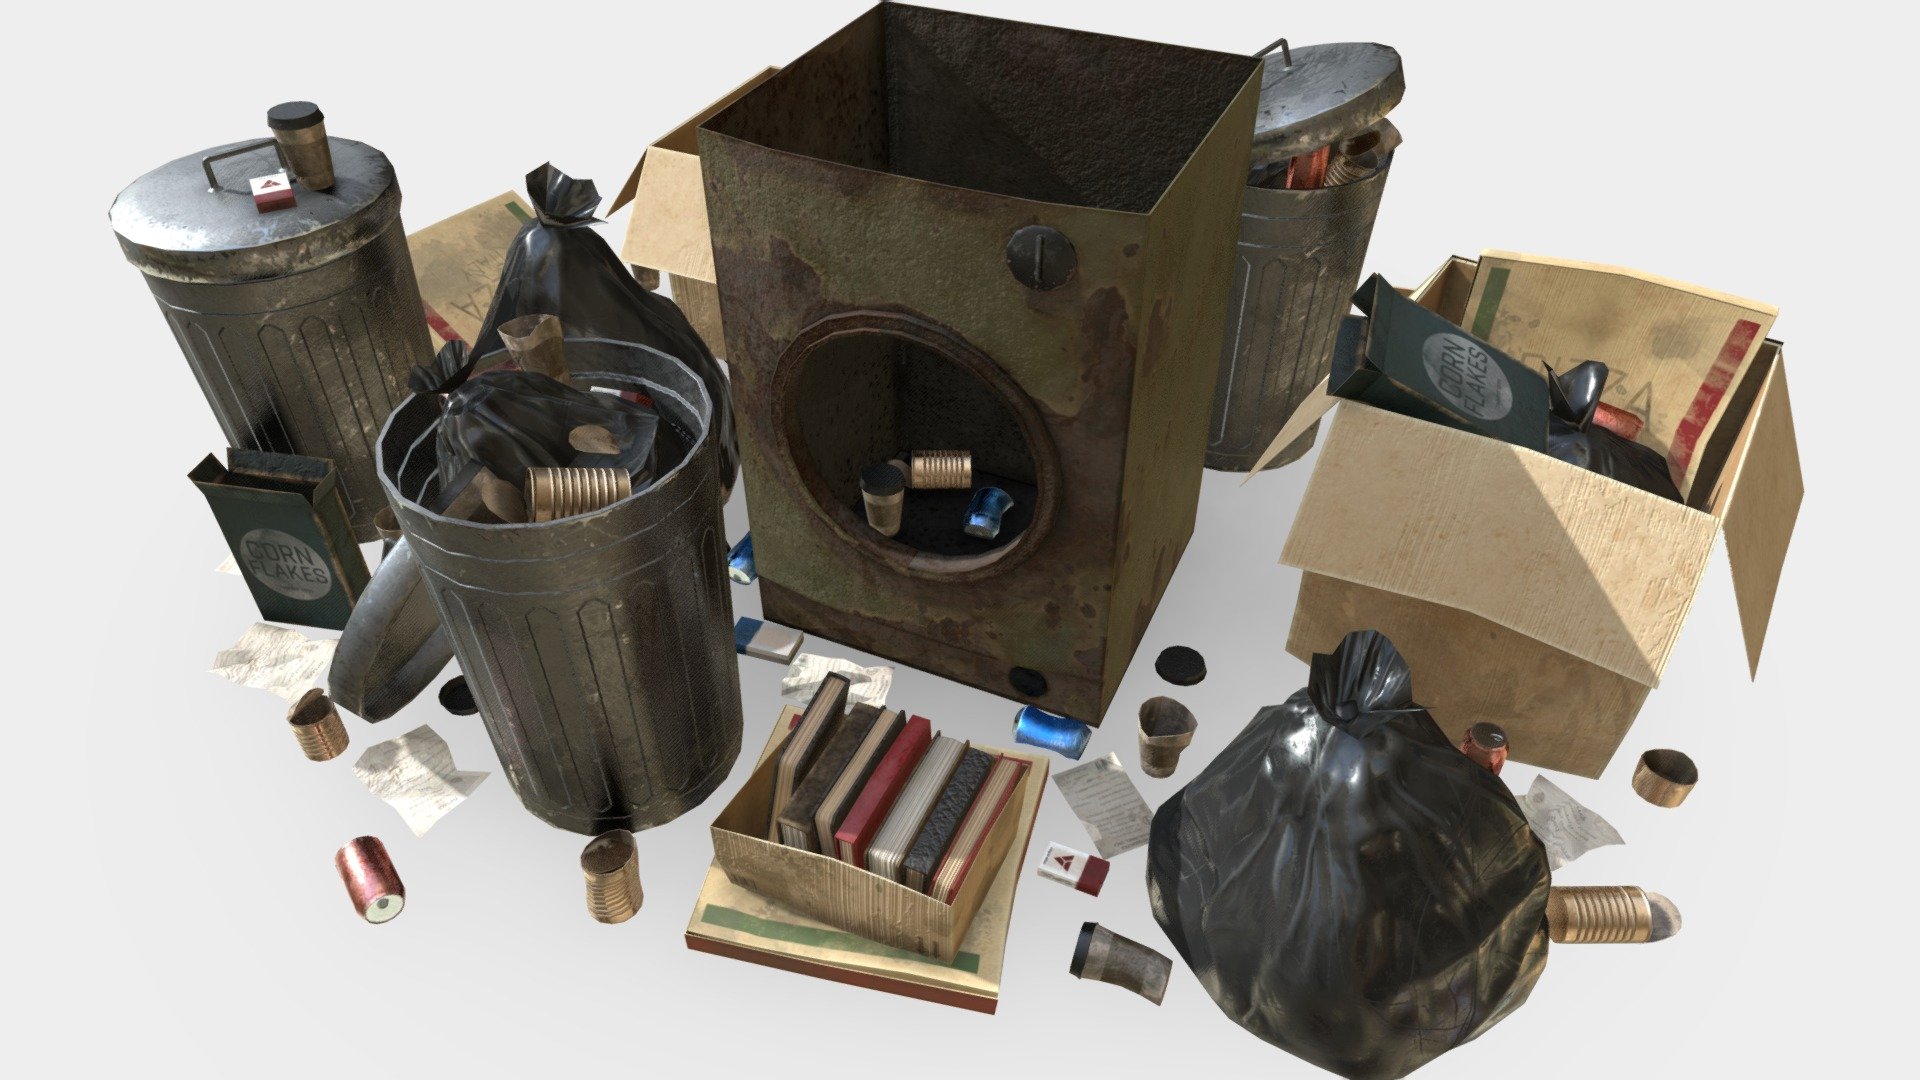 3D model of garbage collection for exterior cyberpunk scenes. This set is suitable for filling any game, any visualizations. Modular sections are easy to piece together in a variety of combinations. The example scene through included in the package. It's readily available to import in Unity3D and Ue4.



Pack contain 46 different objects, 1 Material, pbr textures 4096x4096, 2048x2048



2048 textures 26 mb (Ambient occlusion, Base Color, Height, Metallic, Mixed AO, Normal, Roughness) 

4096 textures 98 mb (Ambient occlusion, Base Color, Height, Metallic, Mixed AO, Normal, Roughness)




https://www.artstation.com/a/6647552 - Garbage set - 3D model by Crazy_8 (@korboleevd) 3d model